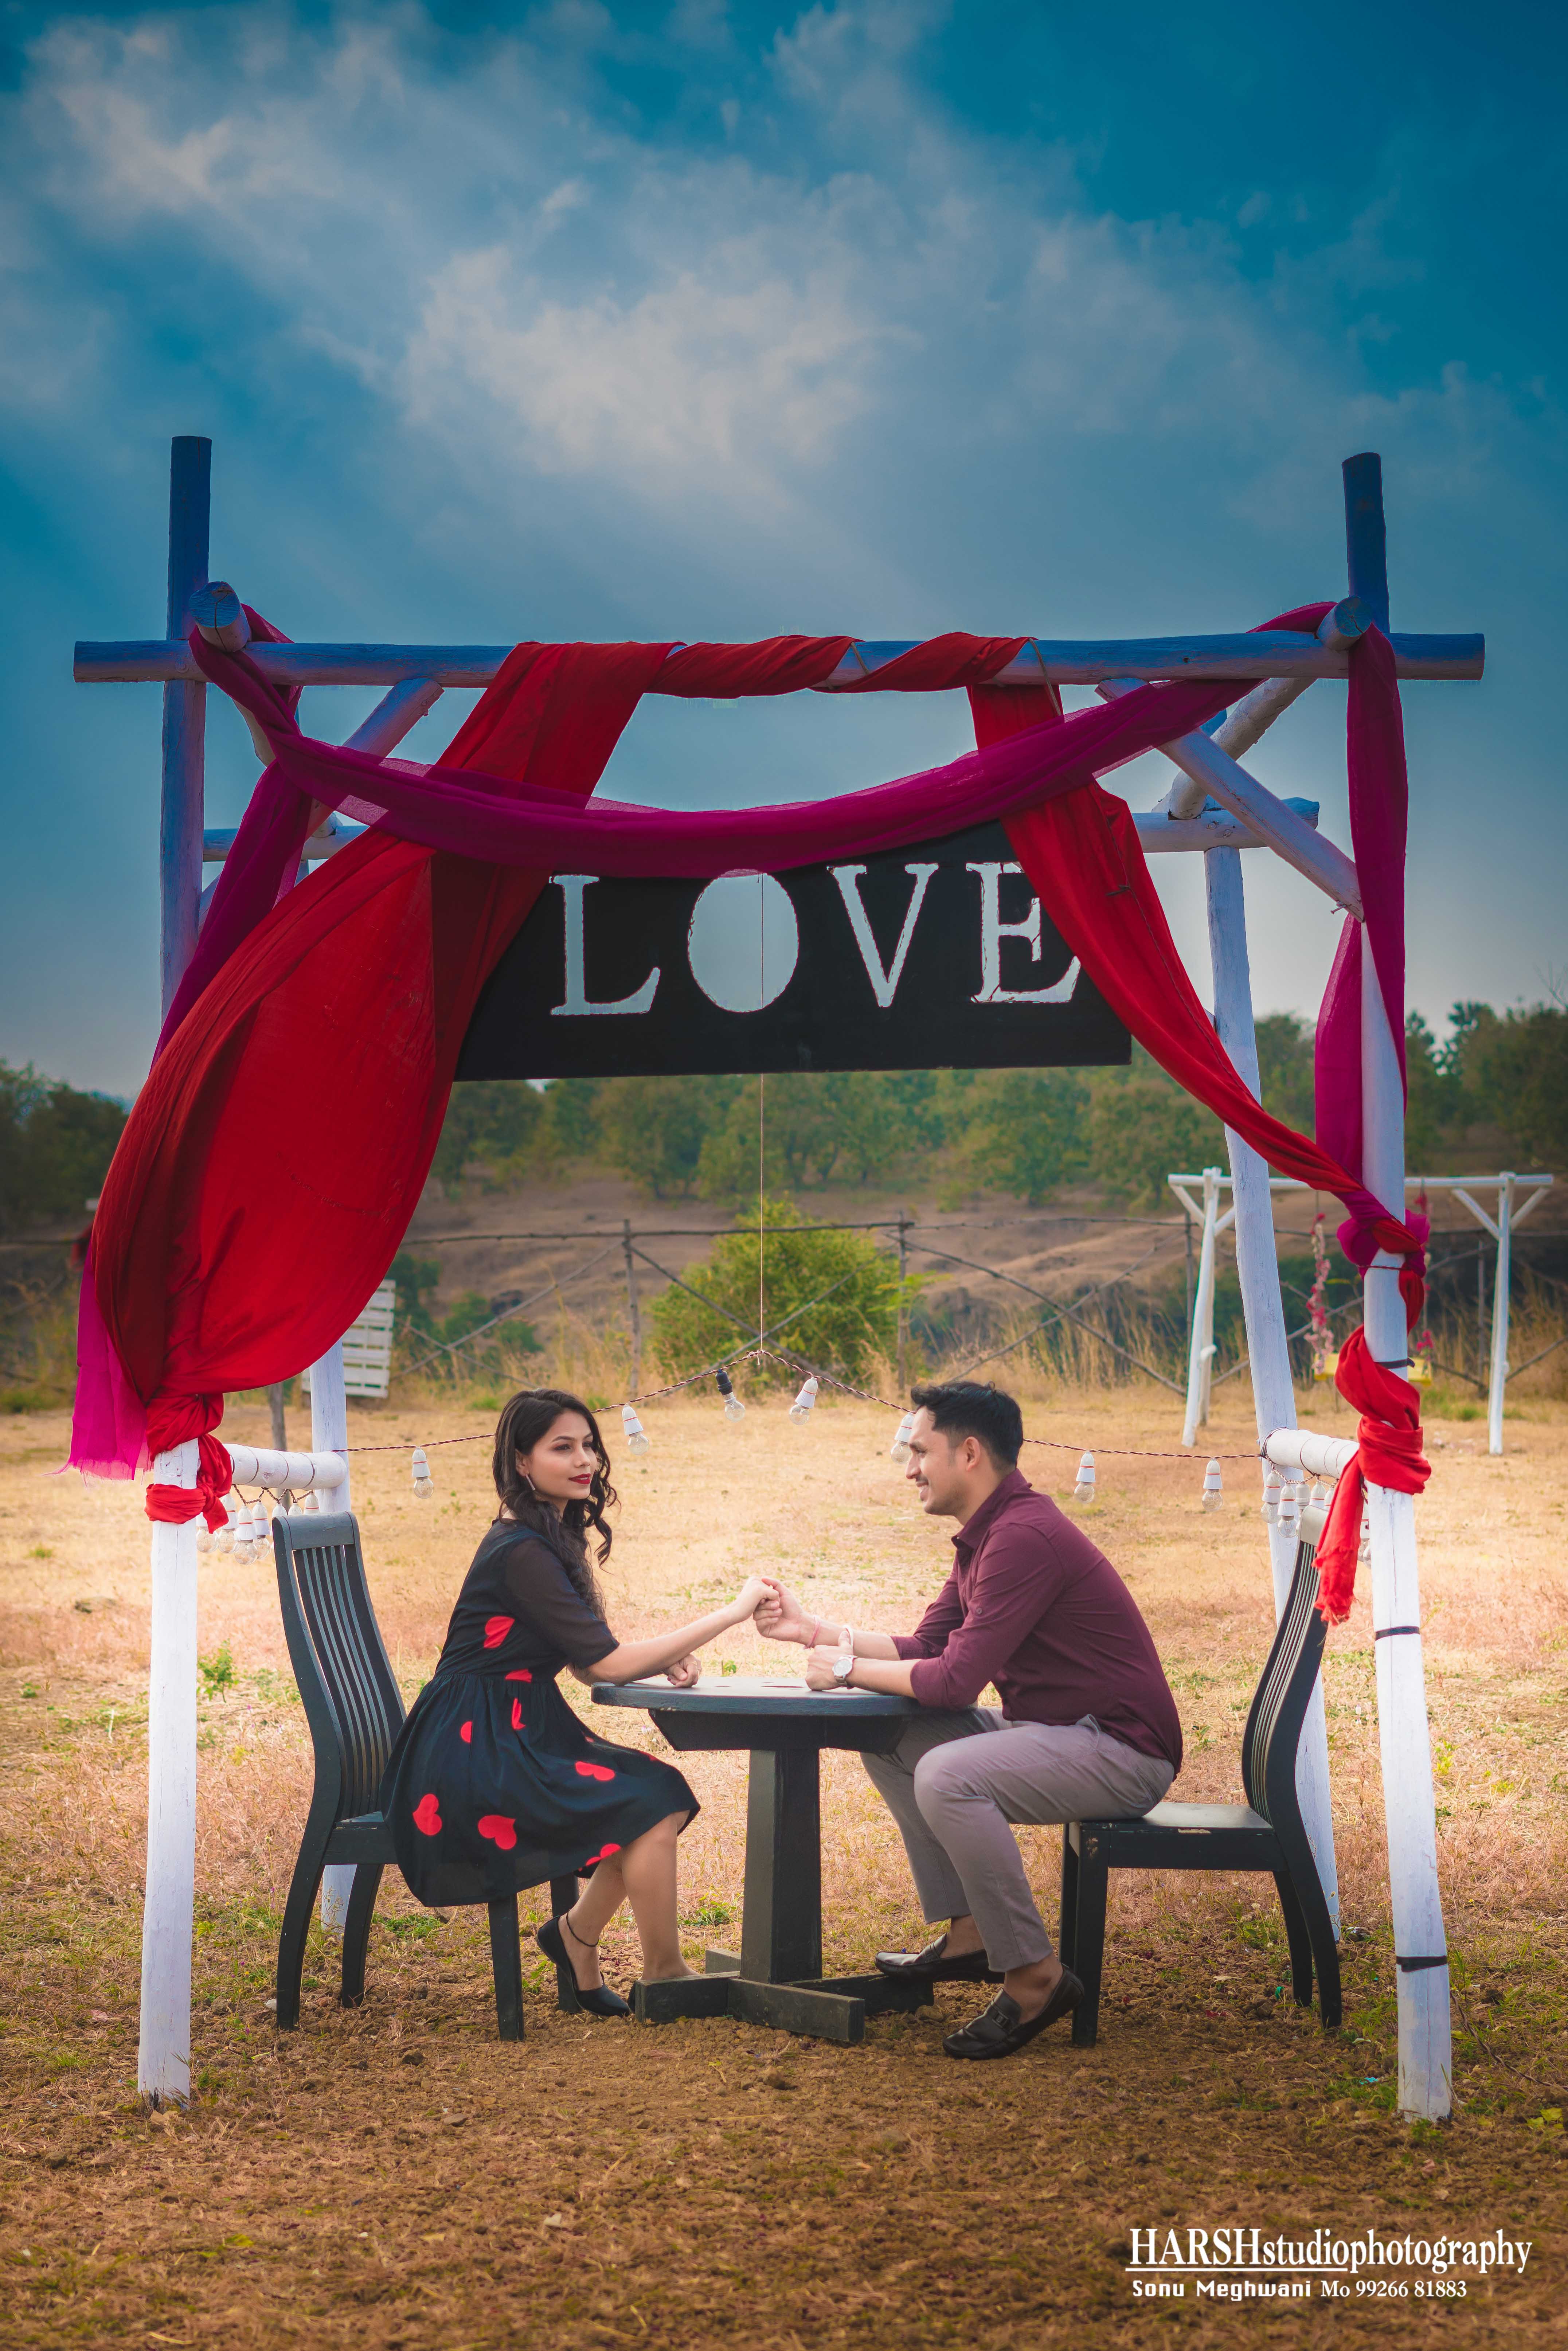 Pre-wedding photoshoot in Indore highlighting a couple's love story captured by Harsh Studio Photography.